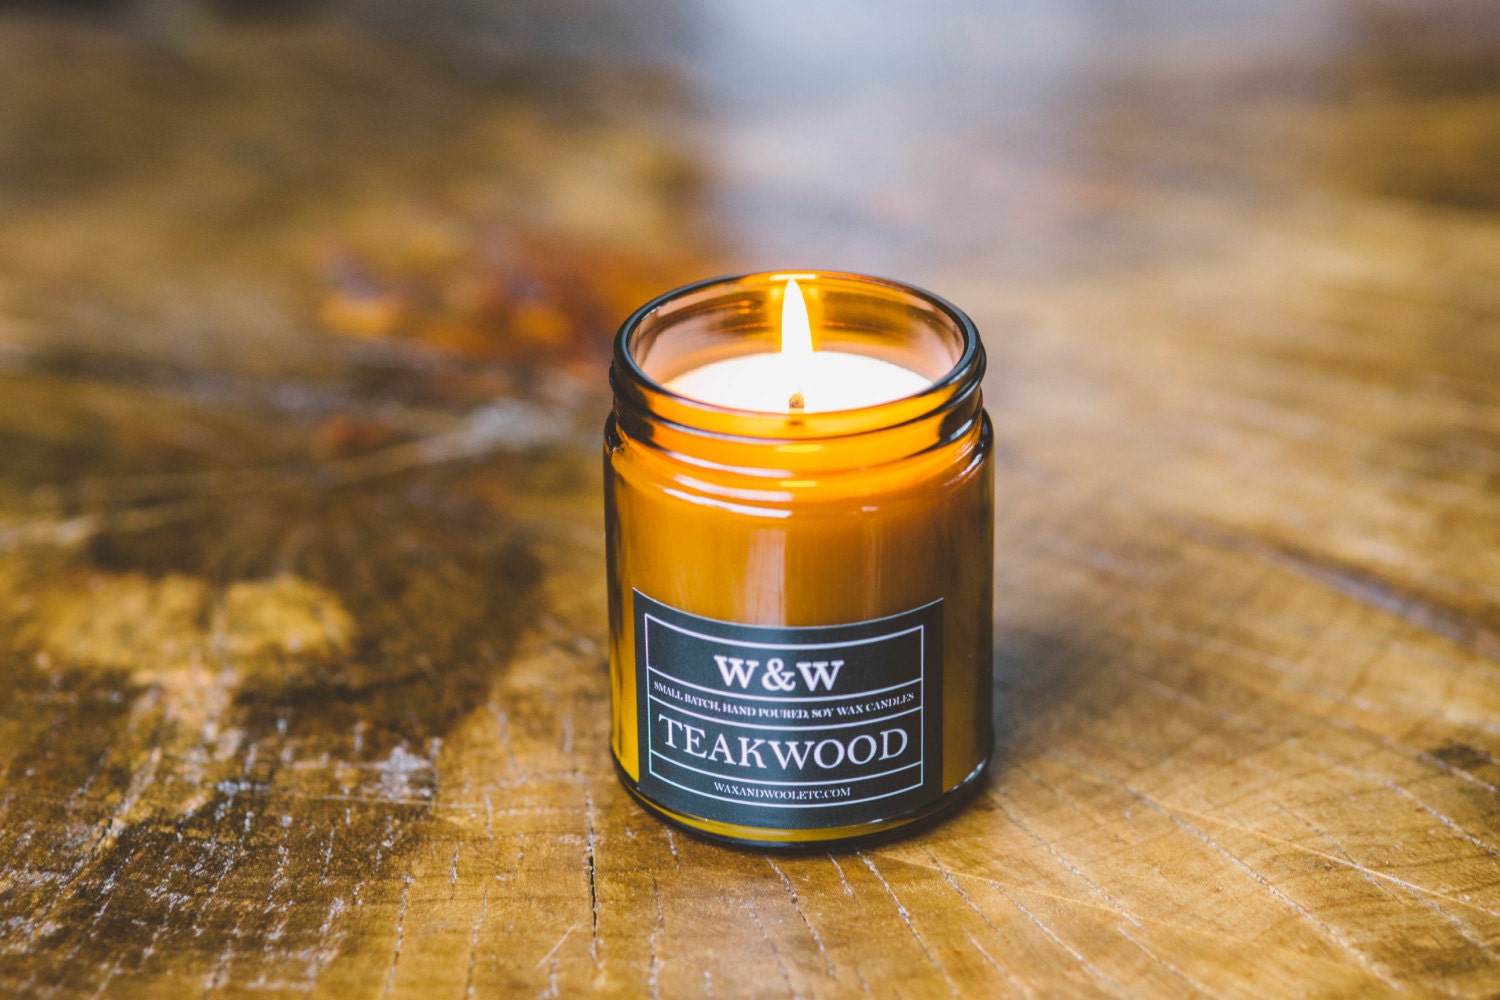 Teakwood and Tobacco Scented Beeswax Candles in Amber Glass, Fall